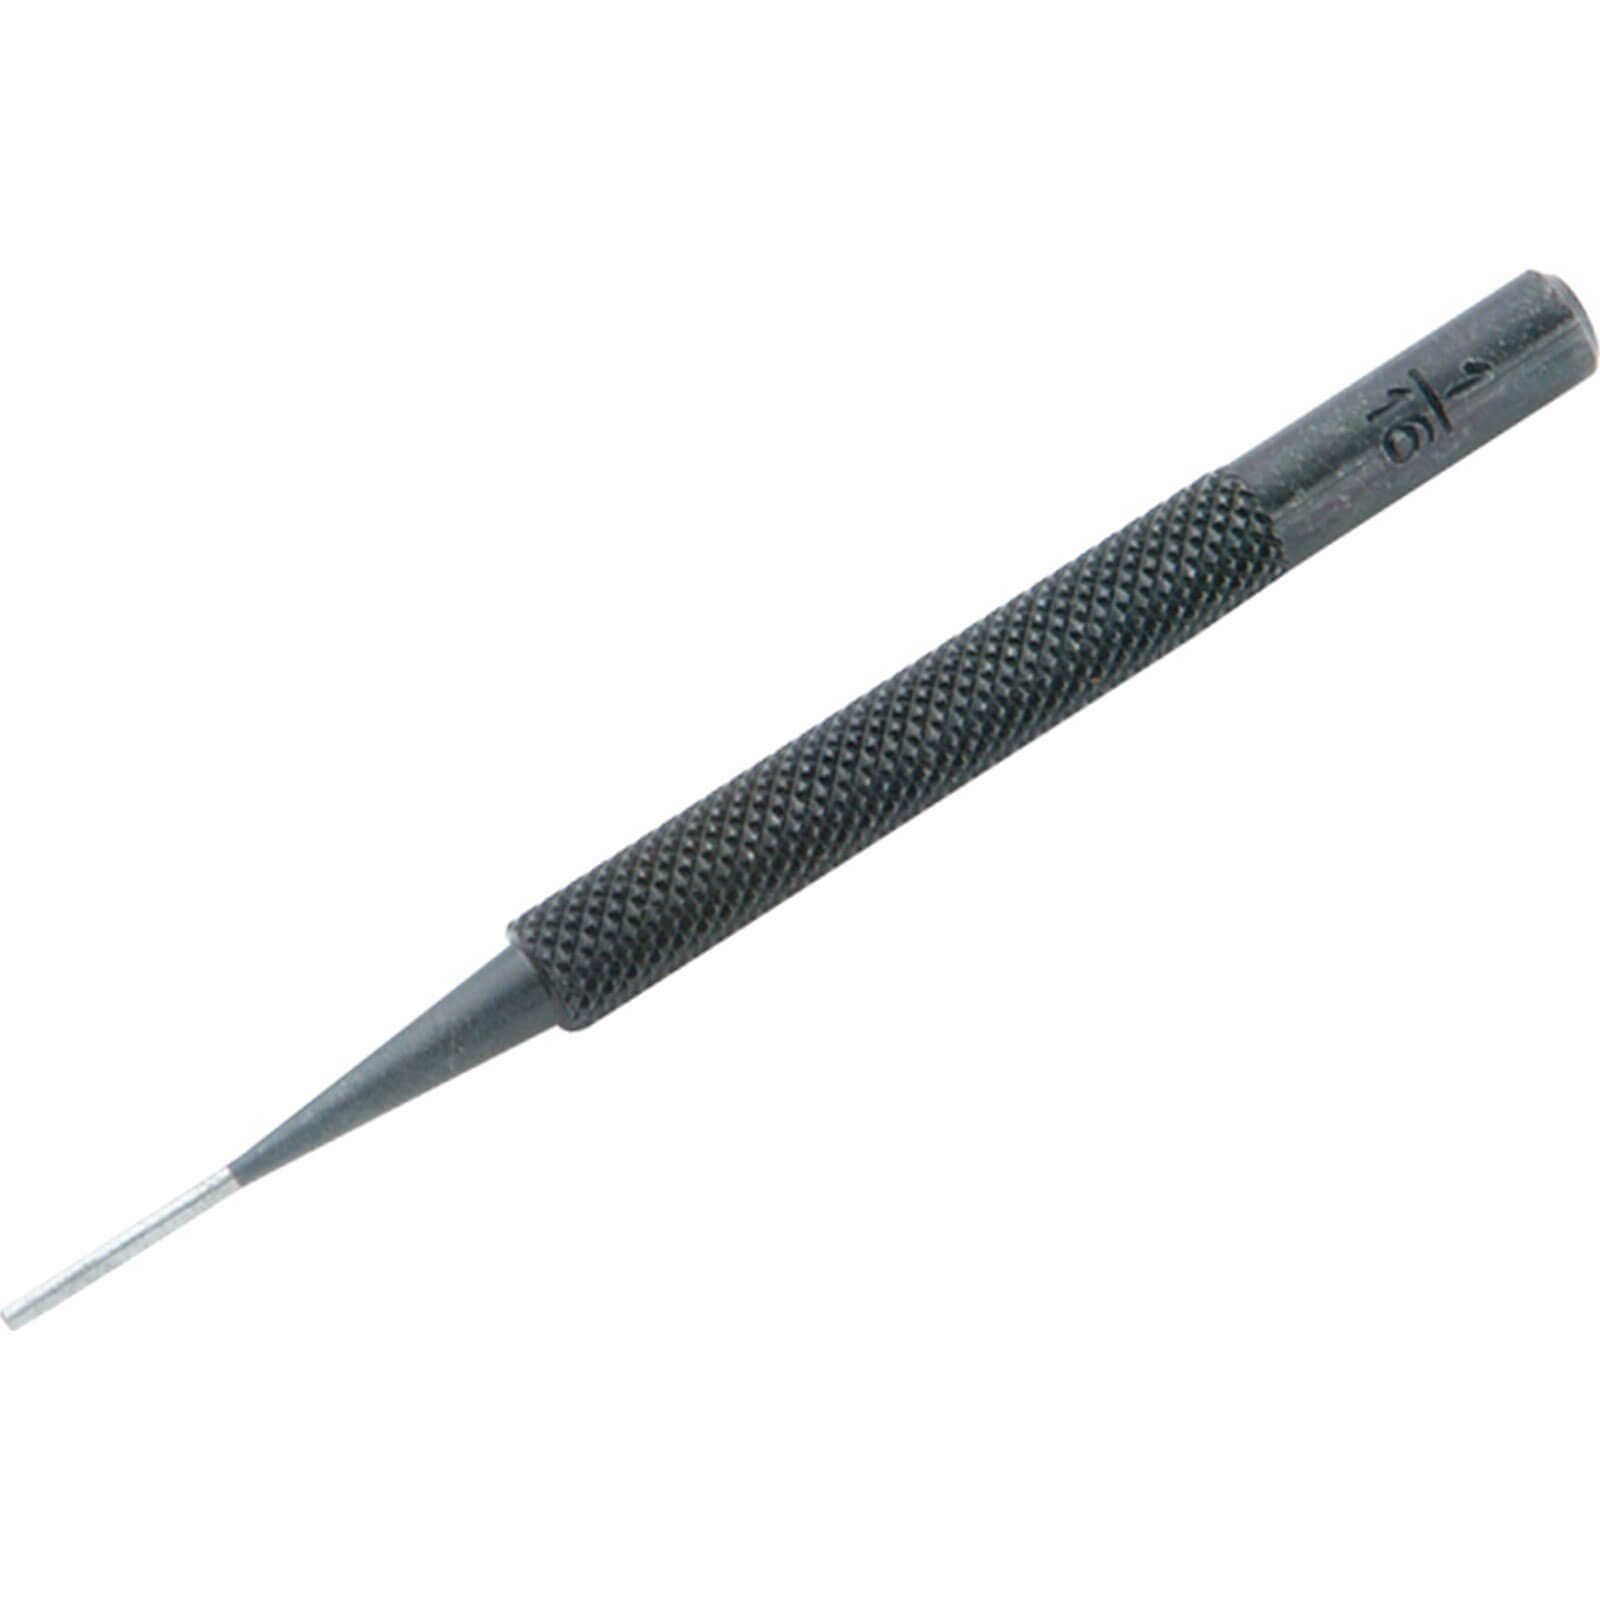 Image of Priory Parrallel Pin Punch 5/32"